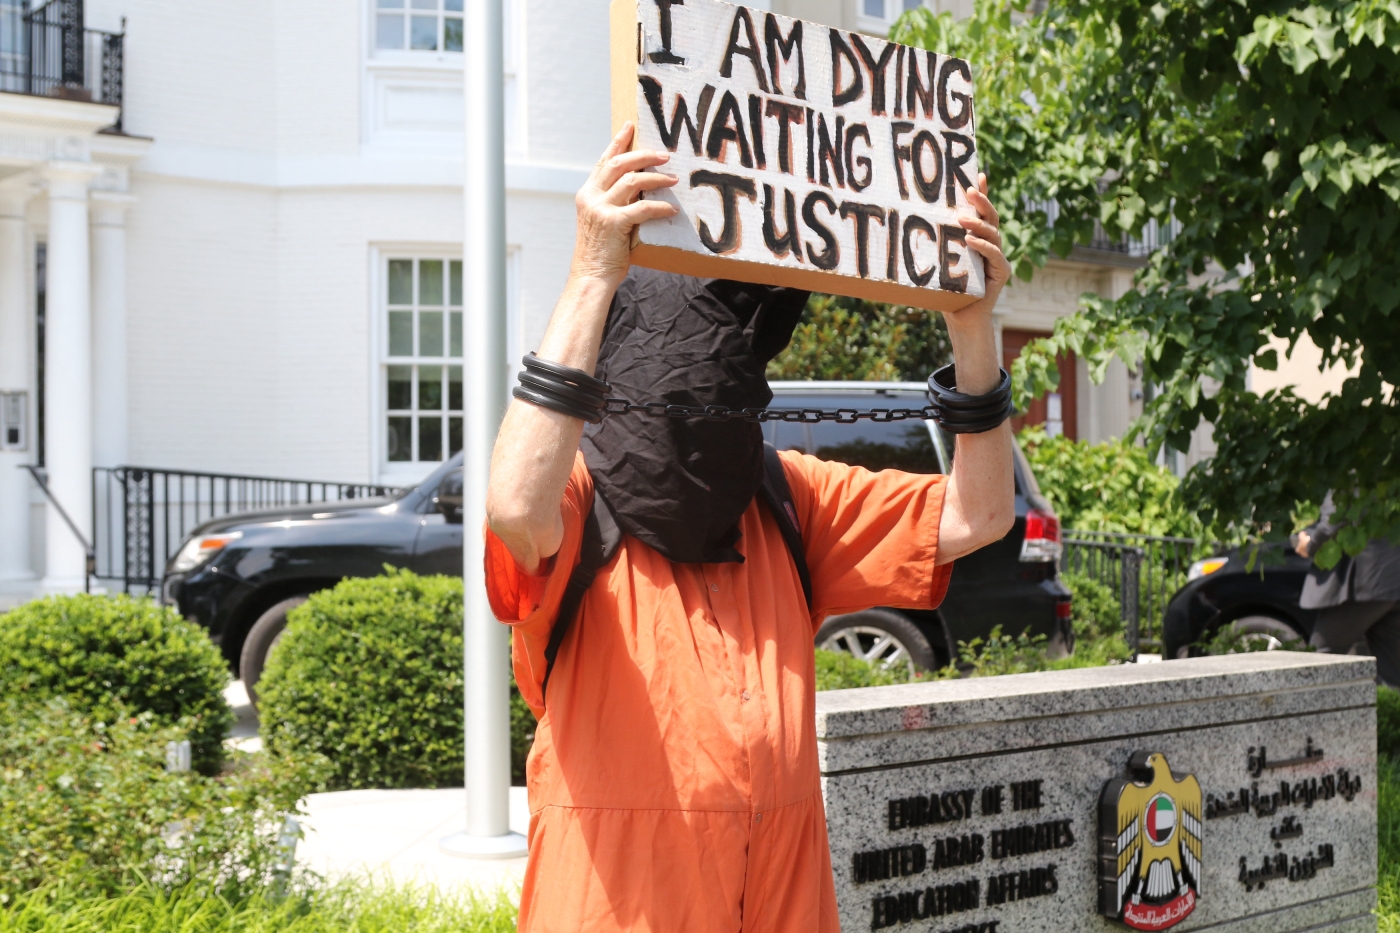 A protester wearing an orange jumpsuit with a black hood holds a sign in front of the UAE Cultural Attache in Washington on 22 July 2021.